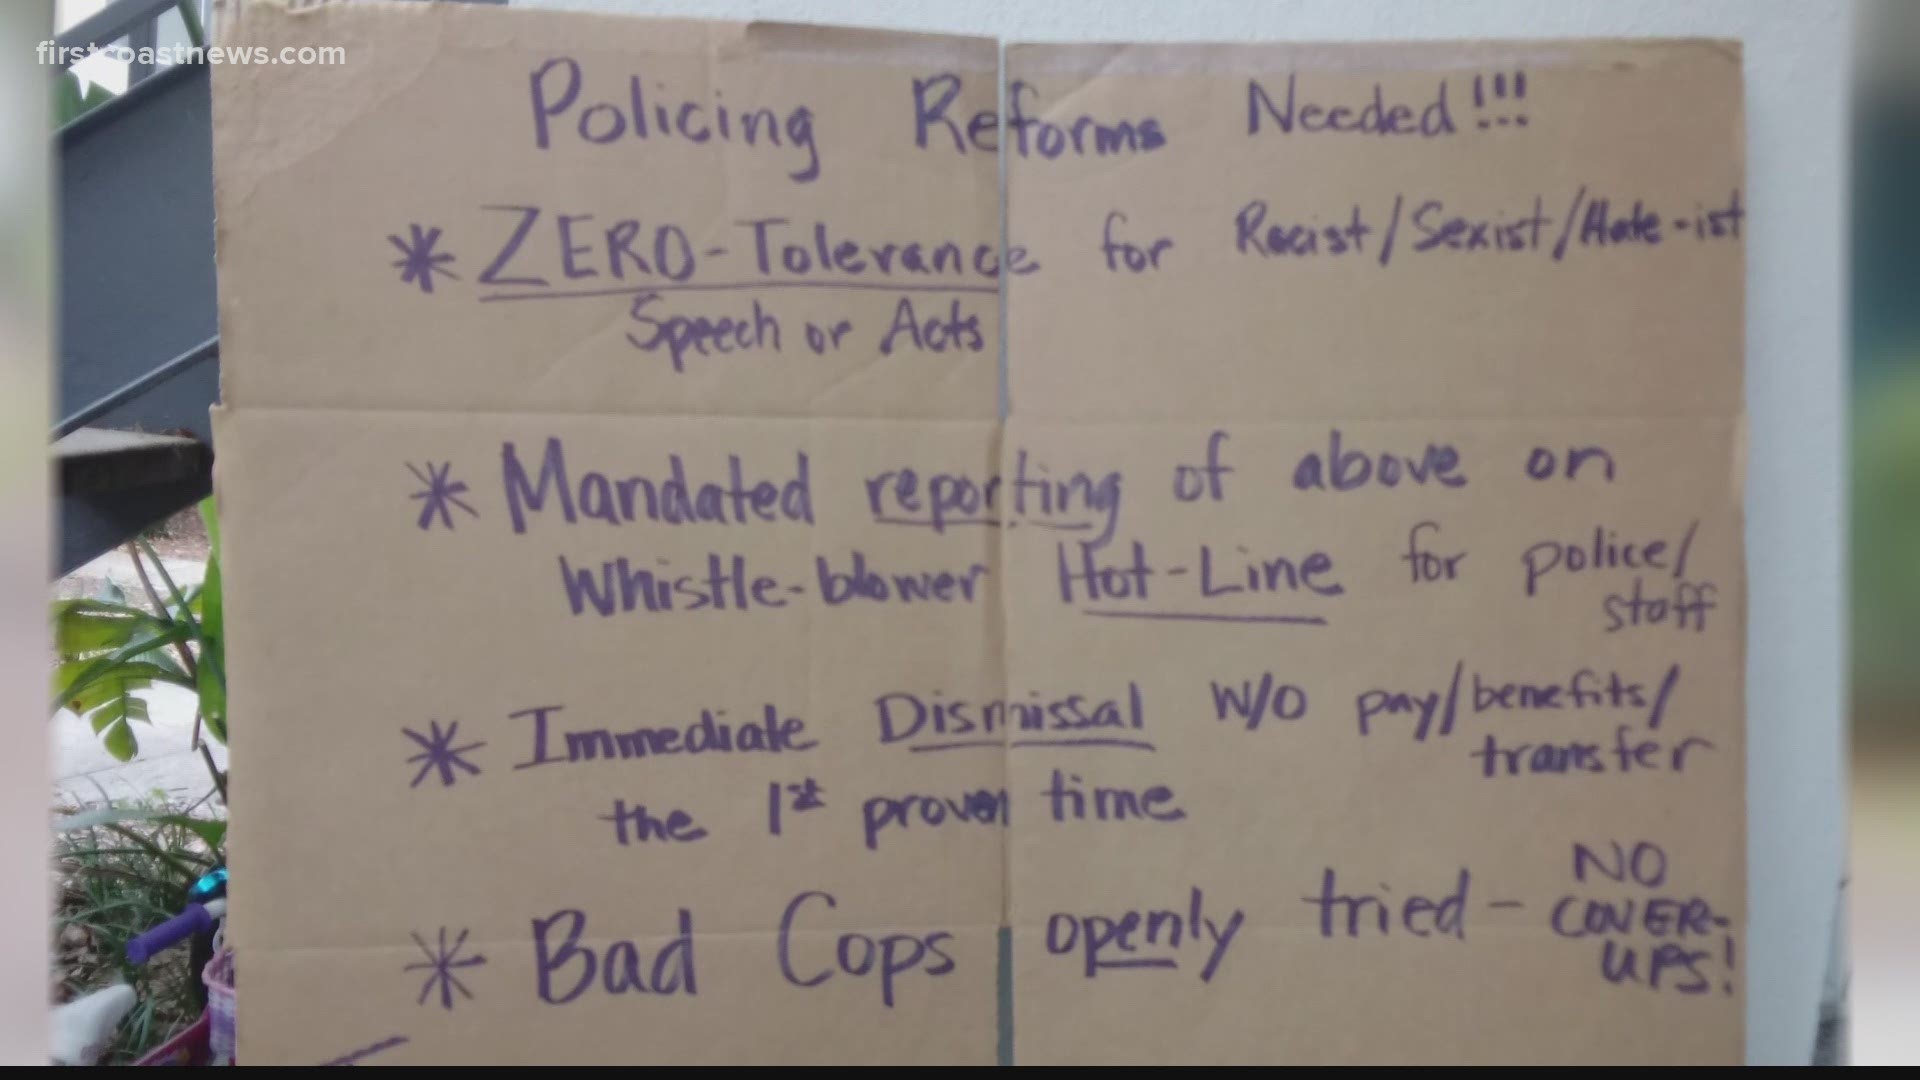 They include different policies that can be put in place to hold Jacksonville law enforcement accountable -- such as zero tolerance for racist or sexist behavior.